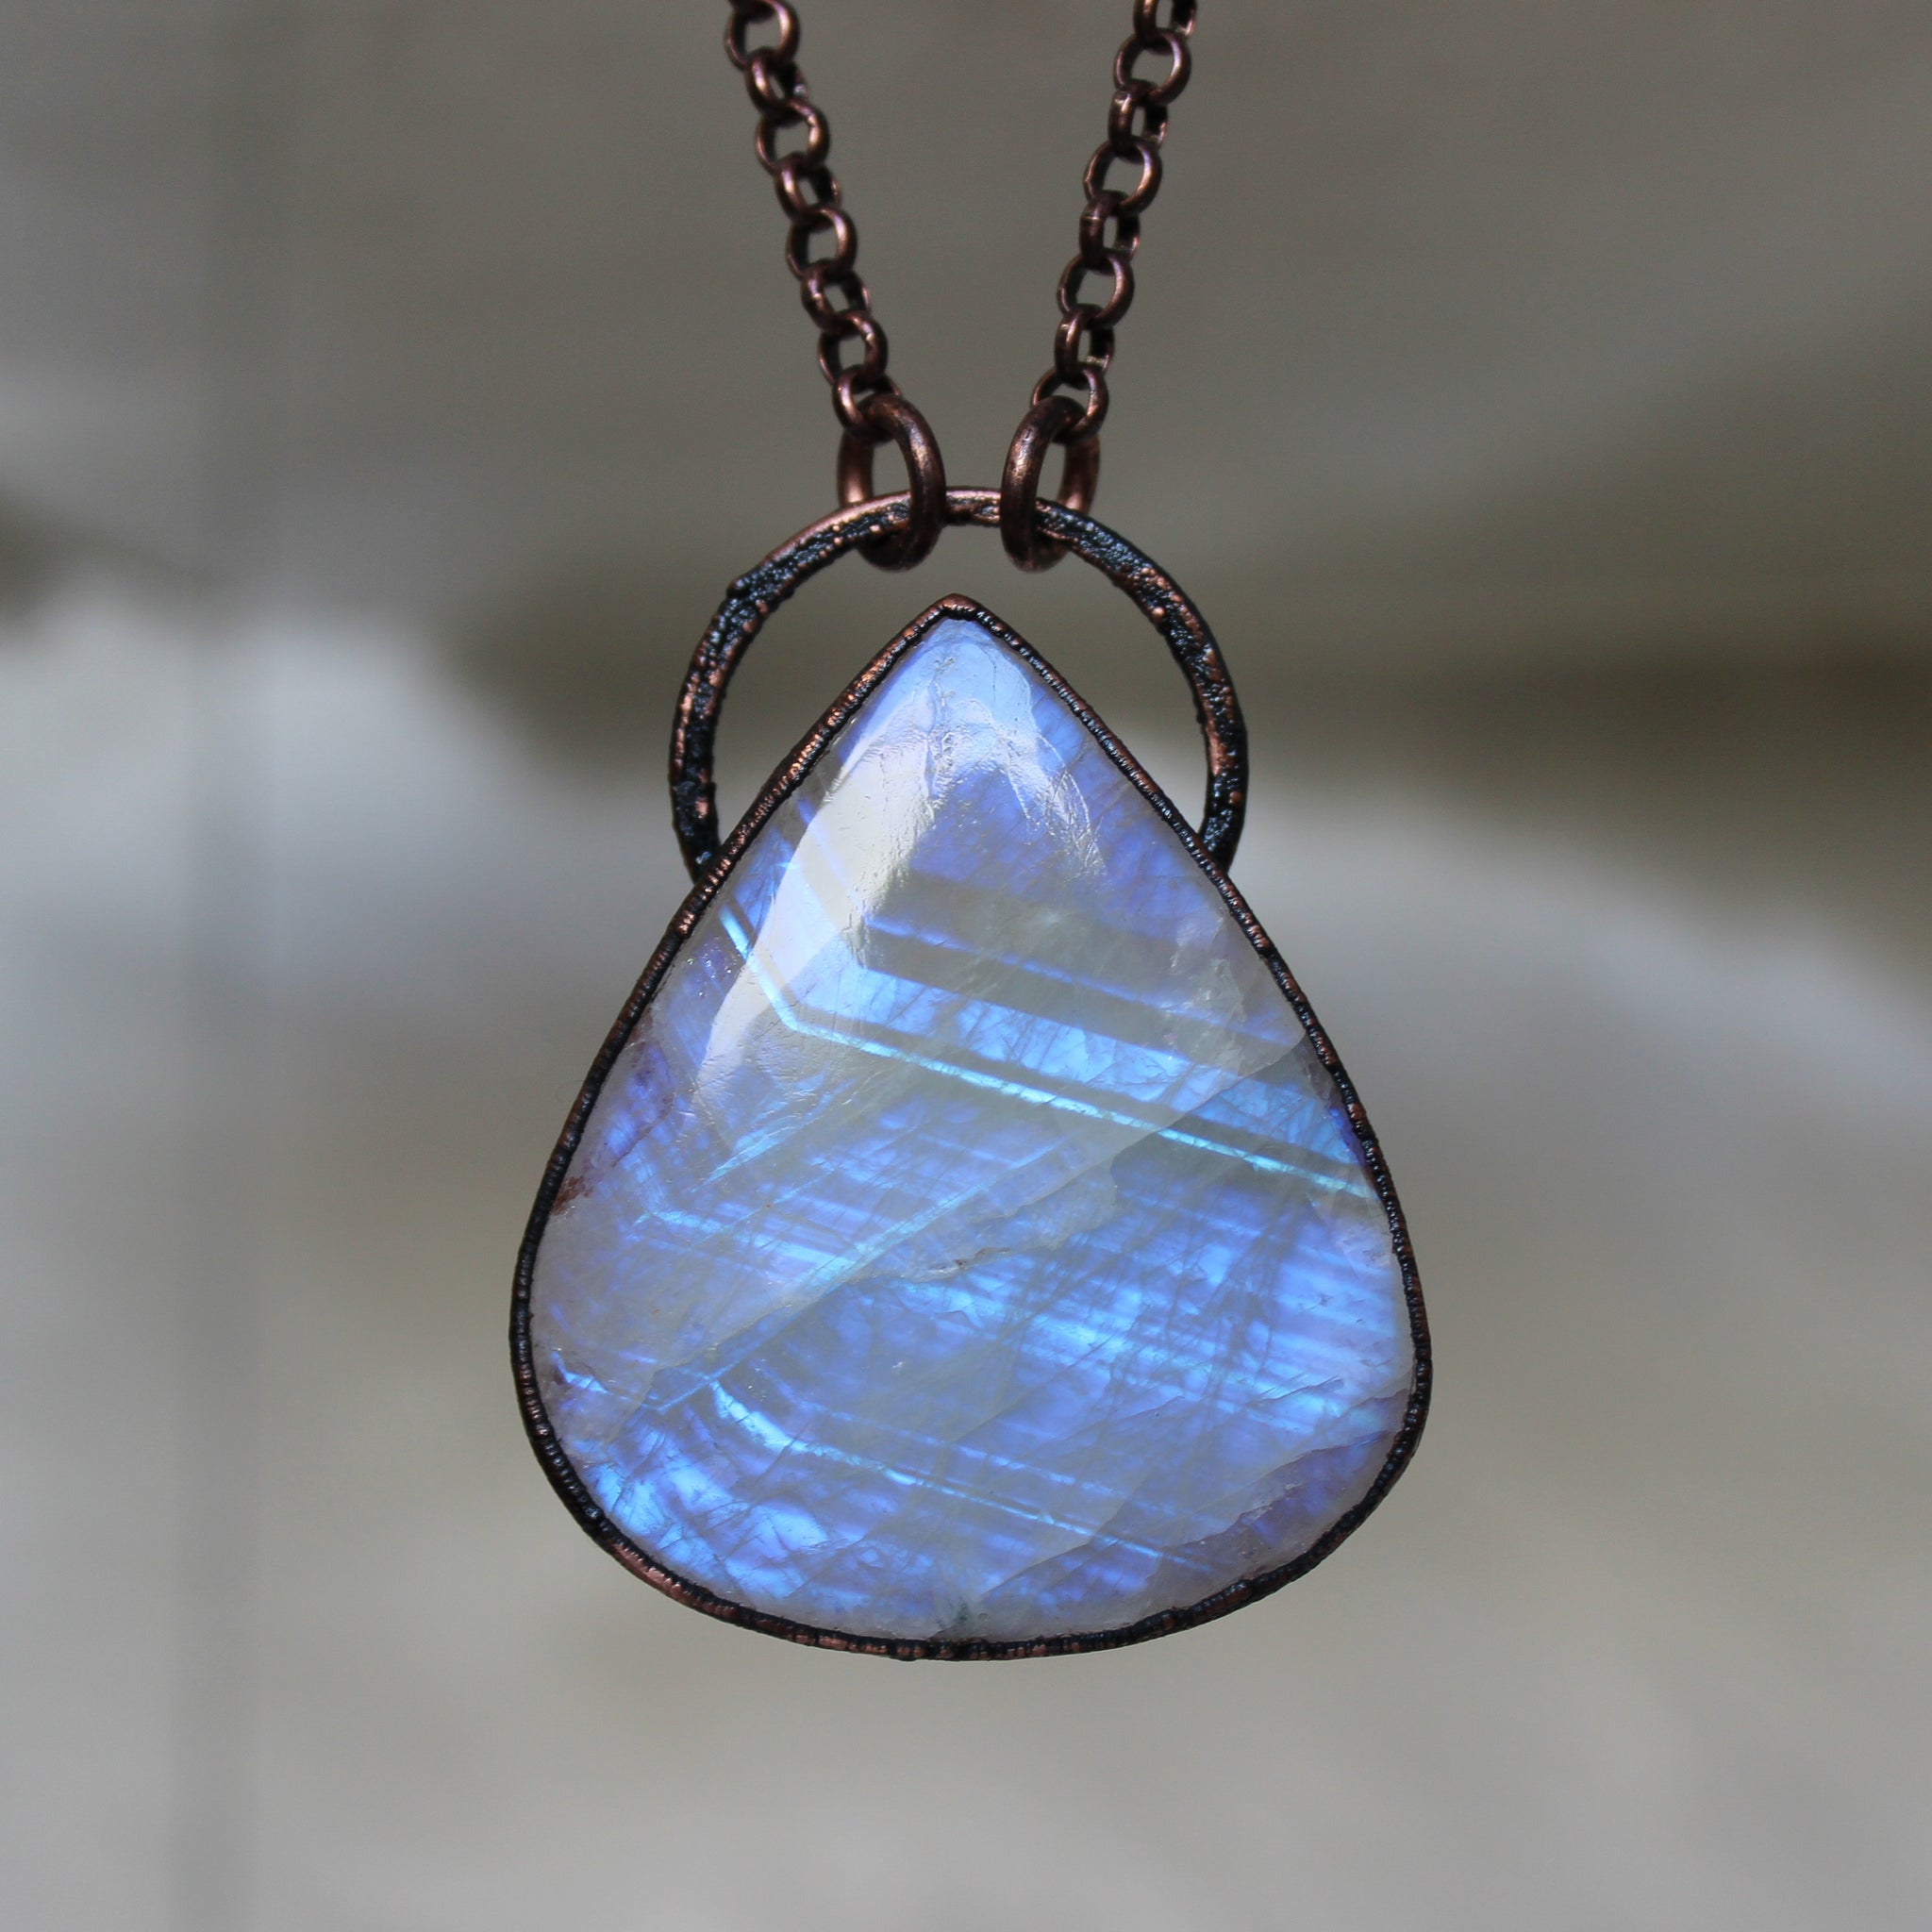 Large Rainbow Moonstone Necklace - a